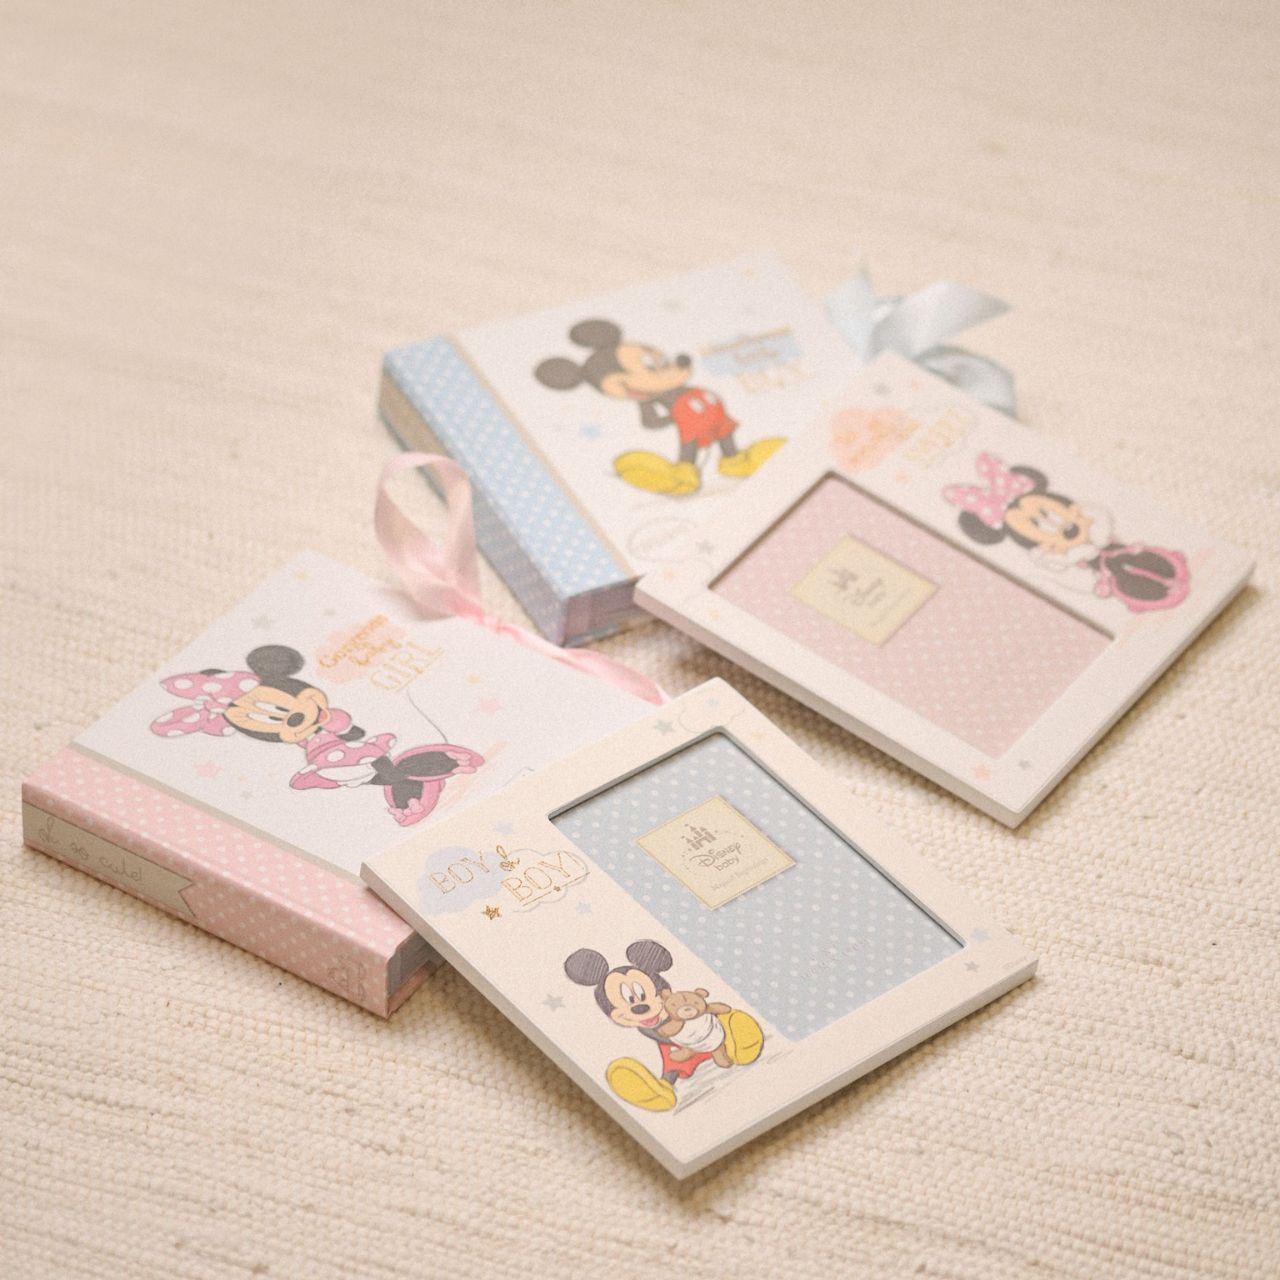 Disney Magical Beginnings 4"x 6" Photo Frame - Mickey  Add a touch of Disney magic to their everyday with a wonderful Mickey Mouse frame from the Magical Beginnings Collection from Classic Disney.